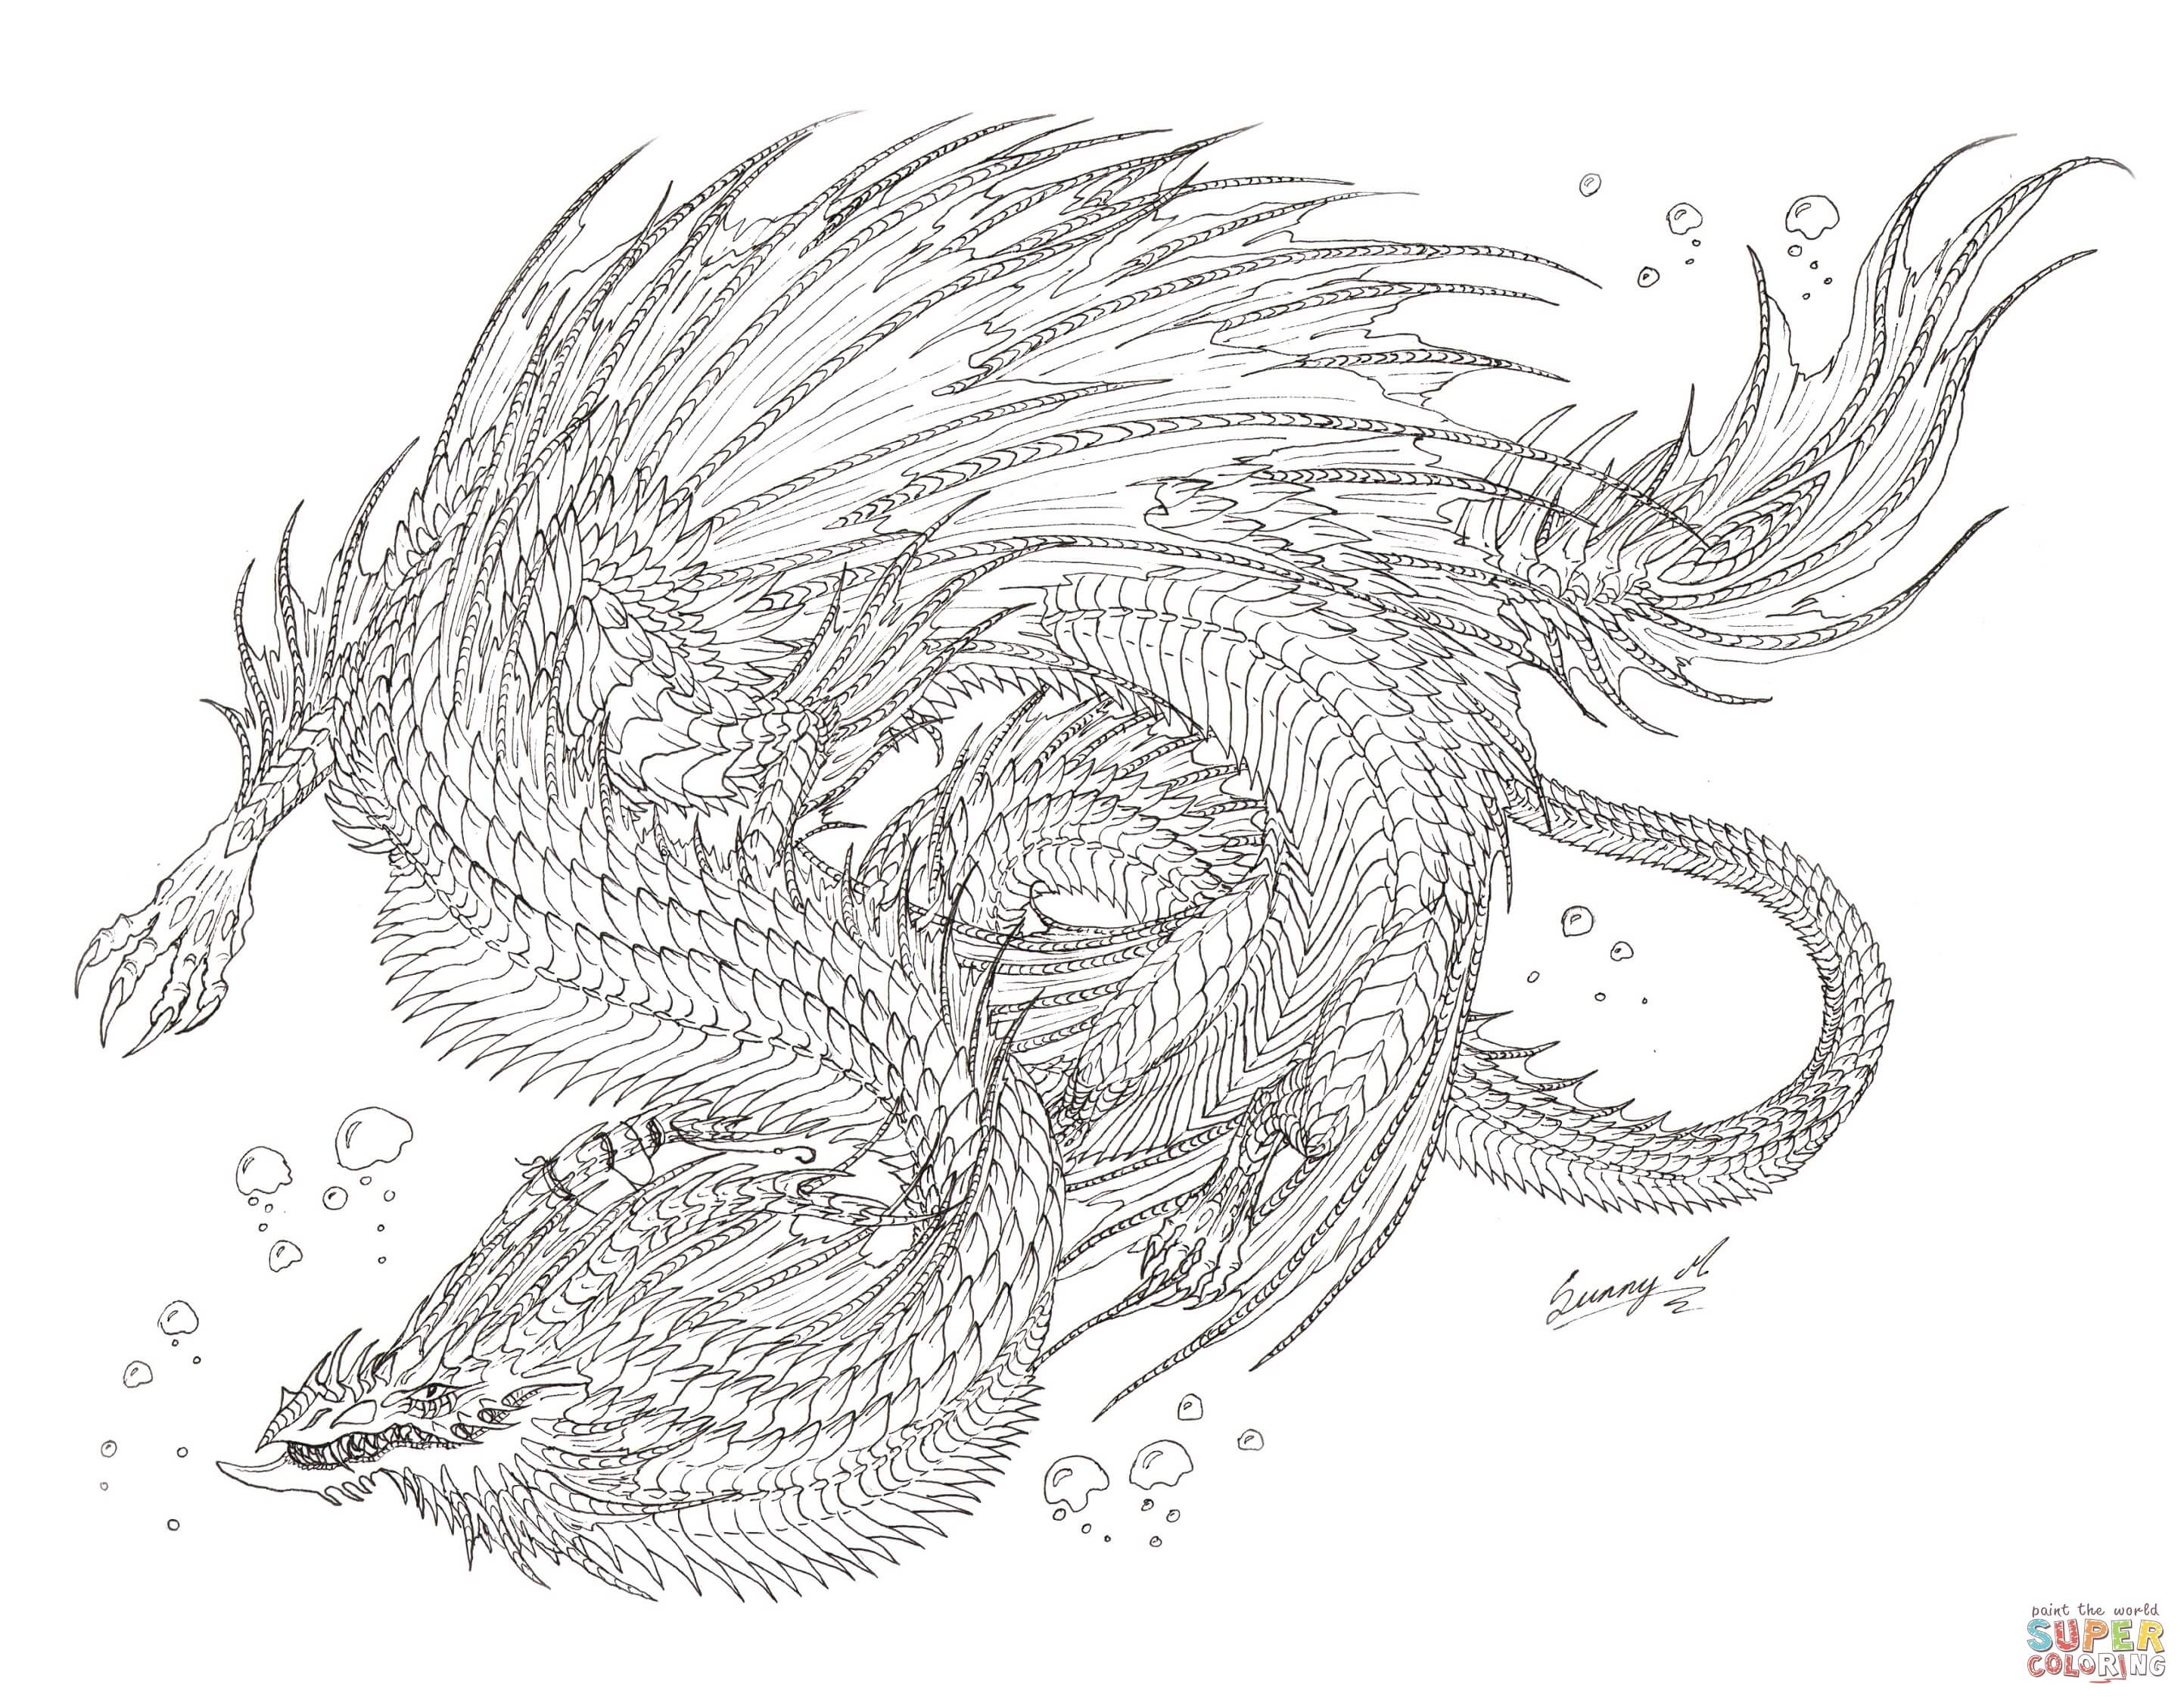 Sea serpent dragon coloring page free printable coloring pages